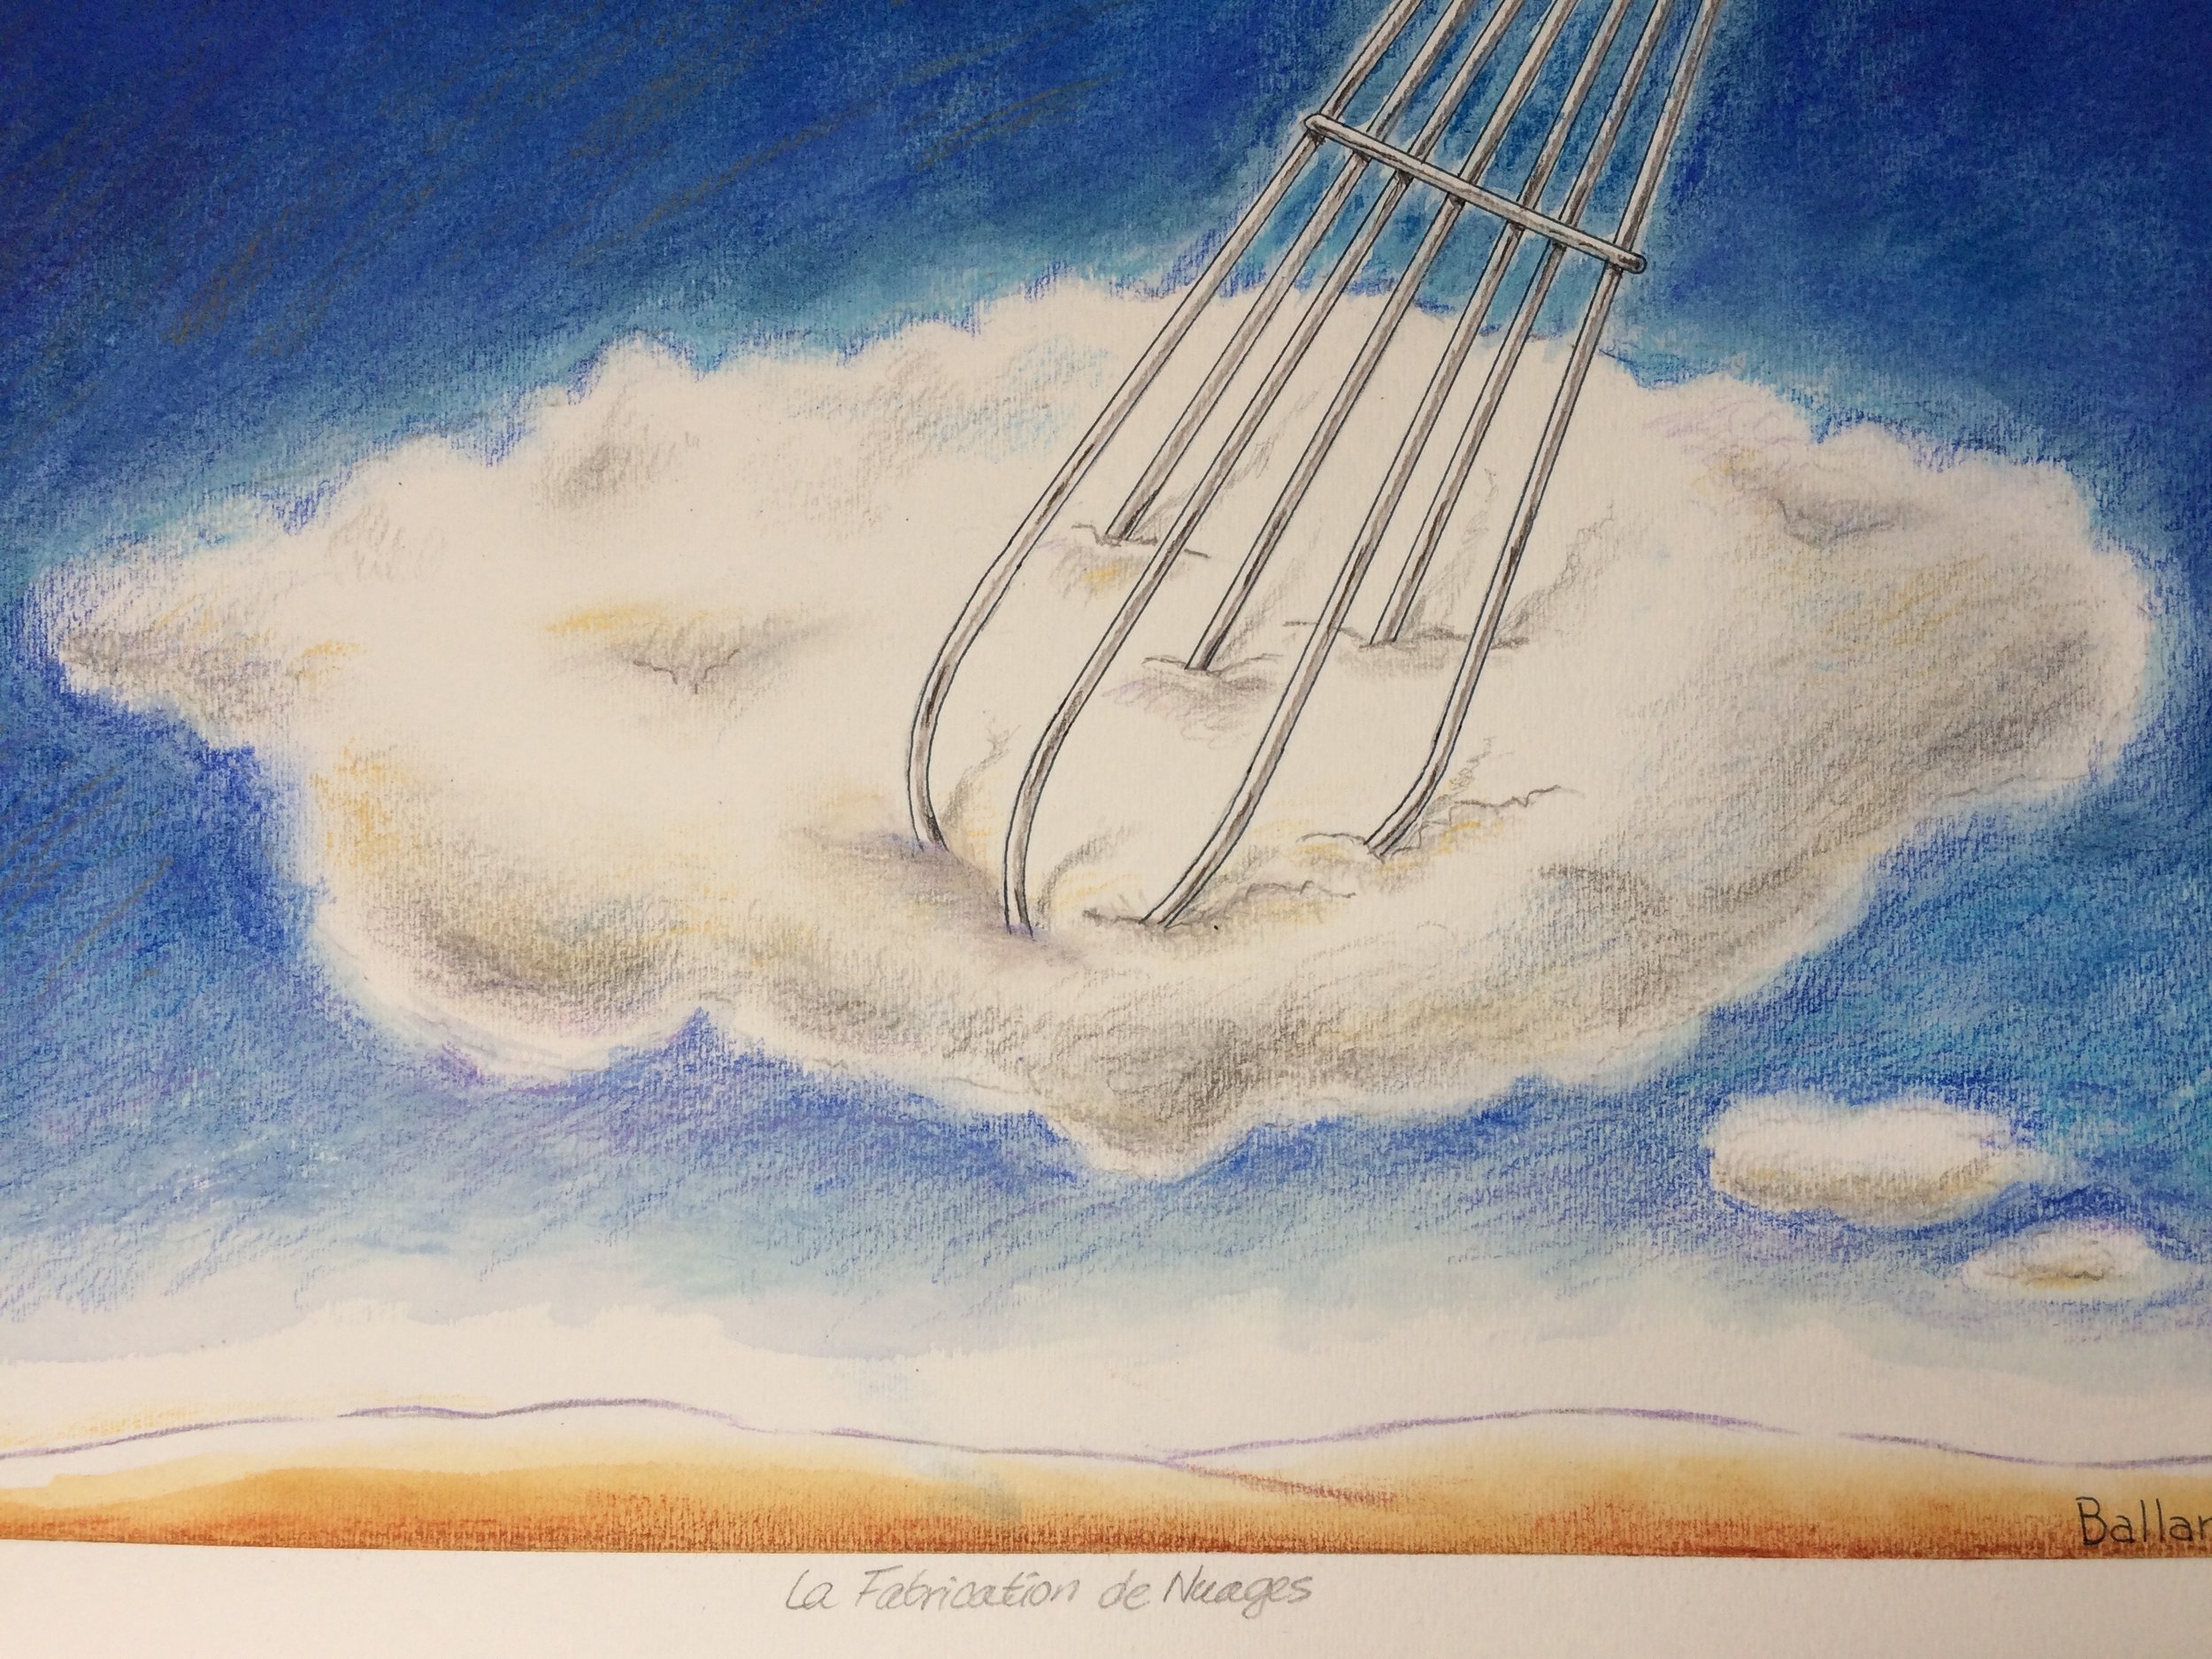   La Fabrication de Nuages    The Making of Clouds   Mixed Media 13" x 17" 